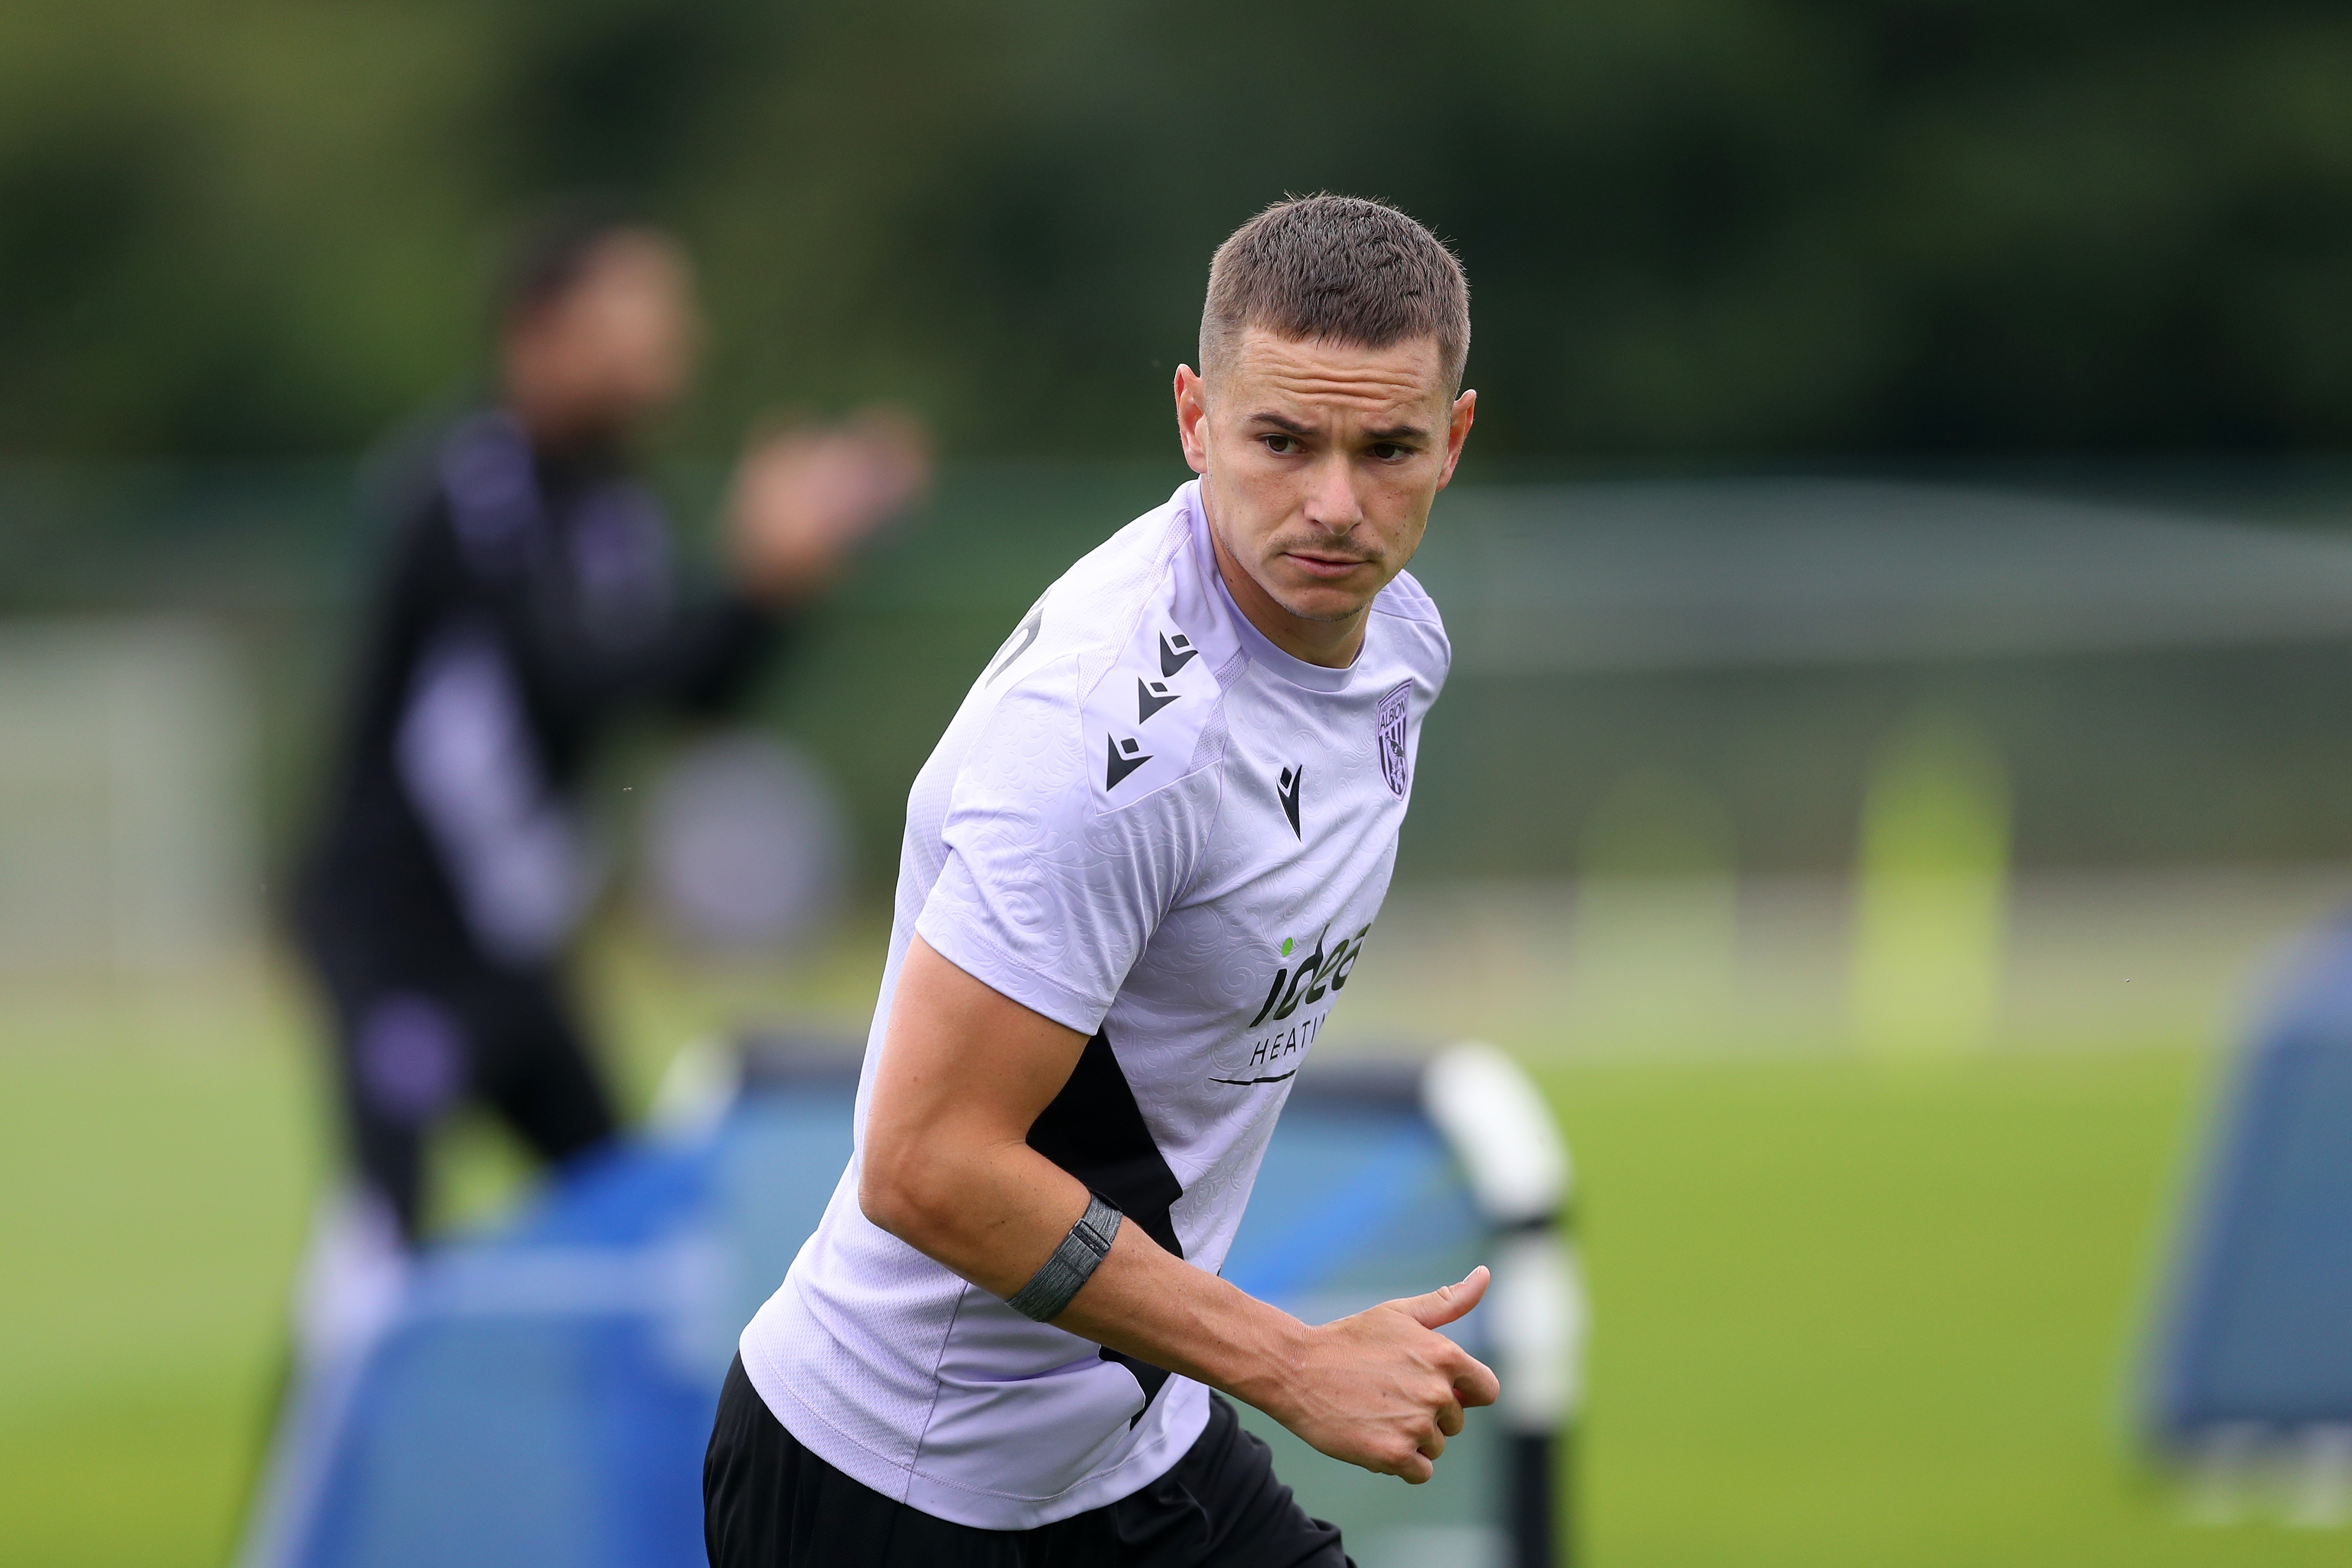 Conor Townsend looking for the ball during a training session 